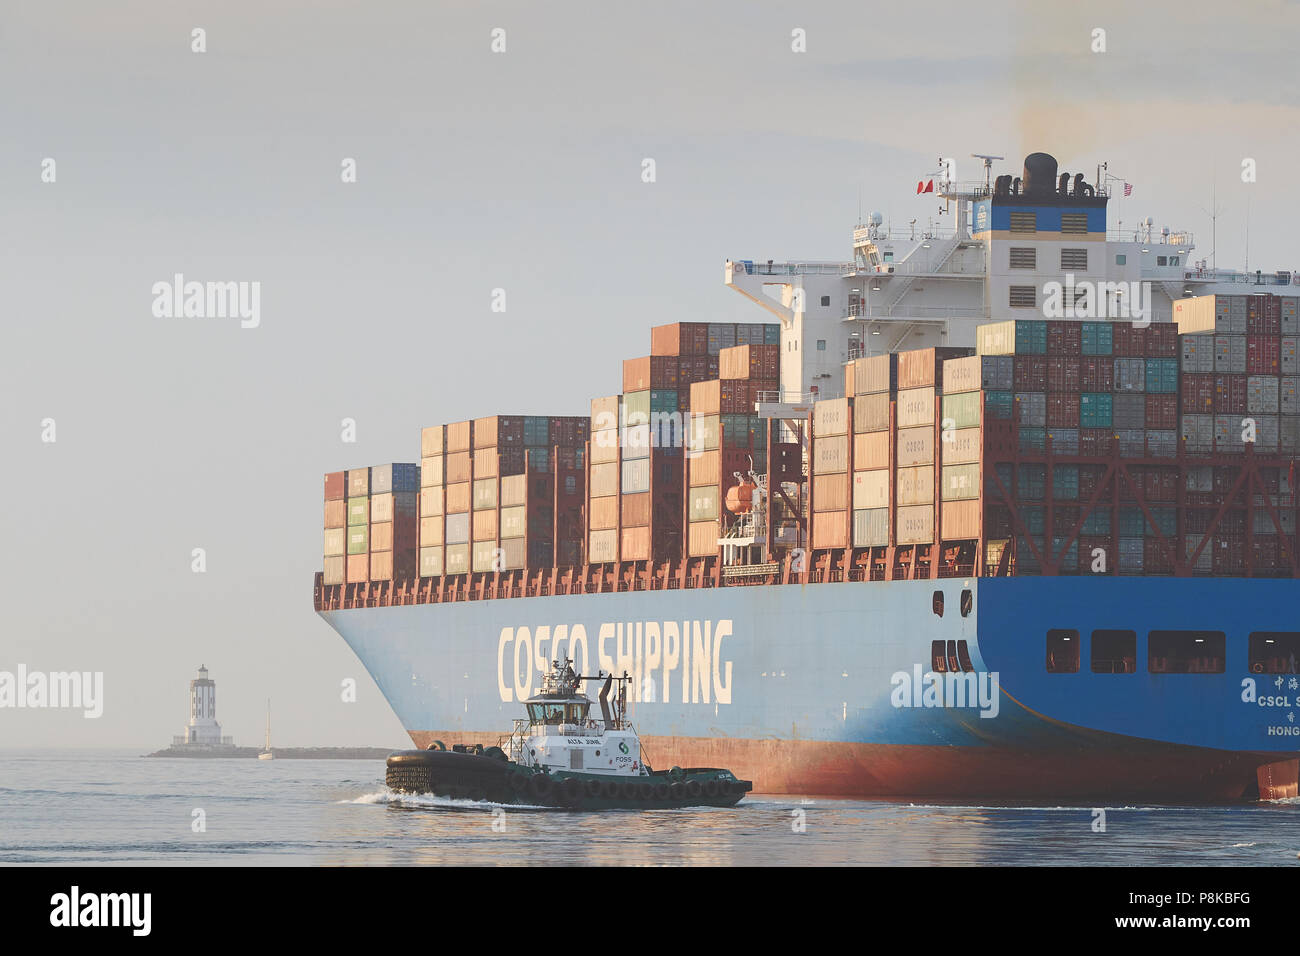 Stern View Of The Stacked Shipping Containers On The COSCO SHIPPING Container Ship, CSCL AUTUMN As She Leaves The Port Of Los Angeles, Ca, USA. Stock Photo